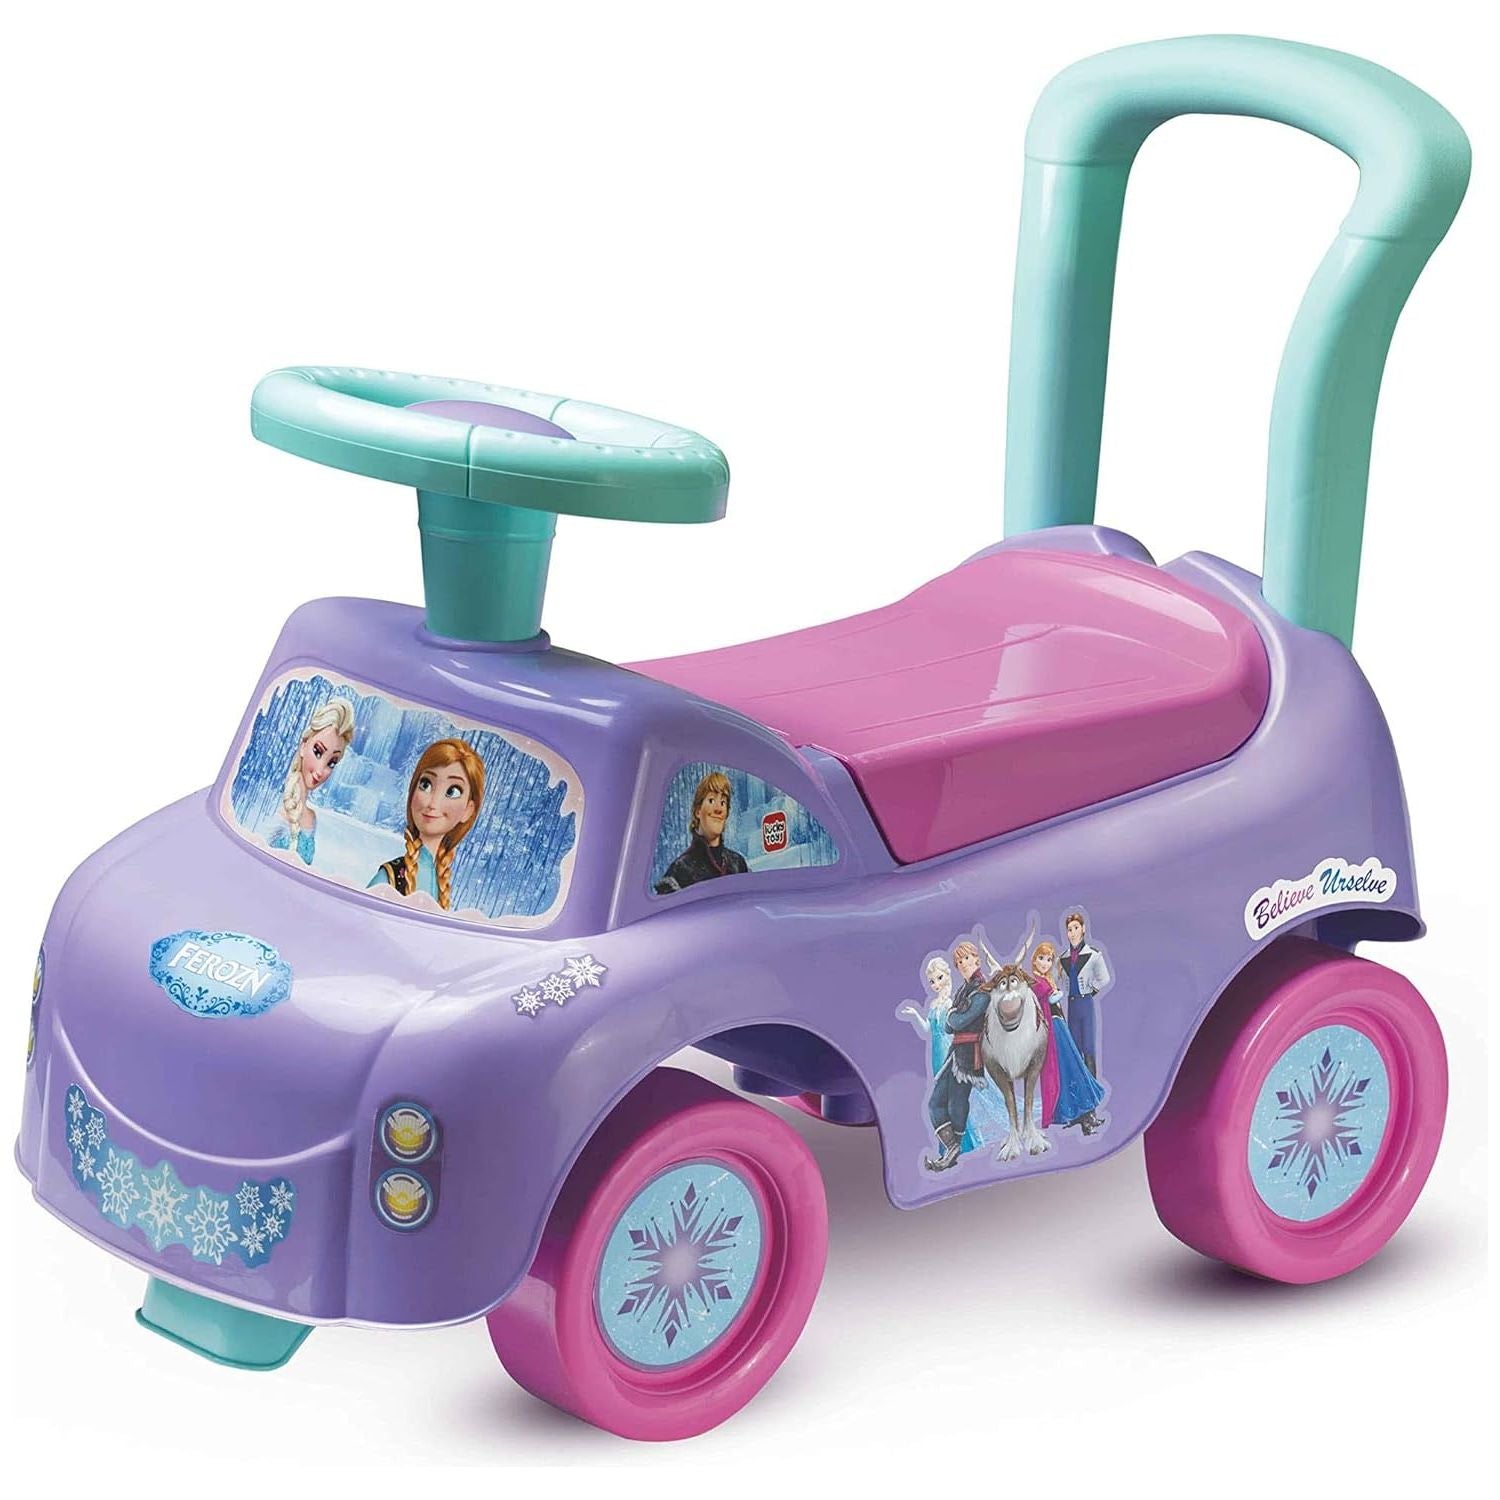 Tic Toys Plastic Push Car Game With Storage Box And Button For Kids - Frozen